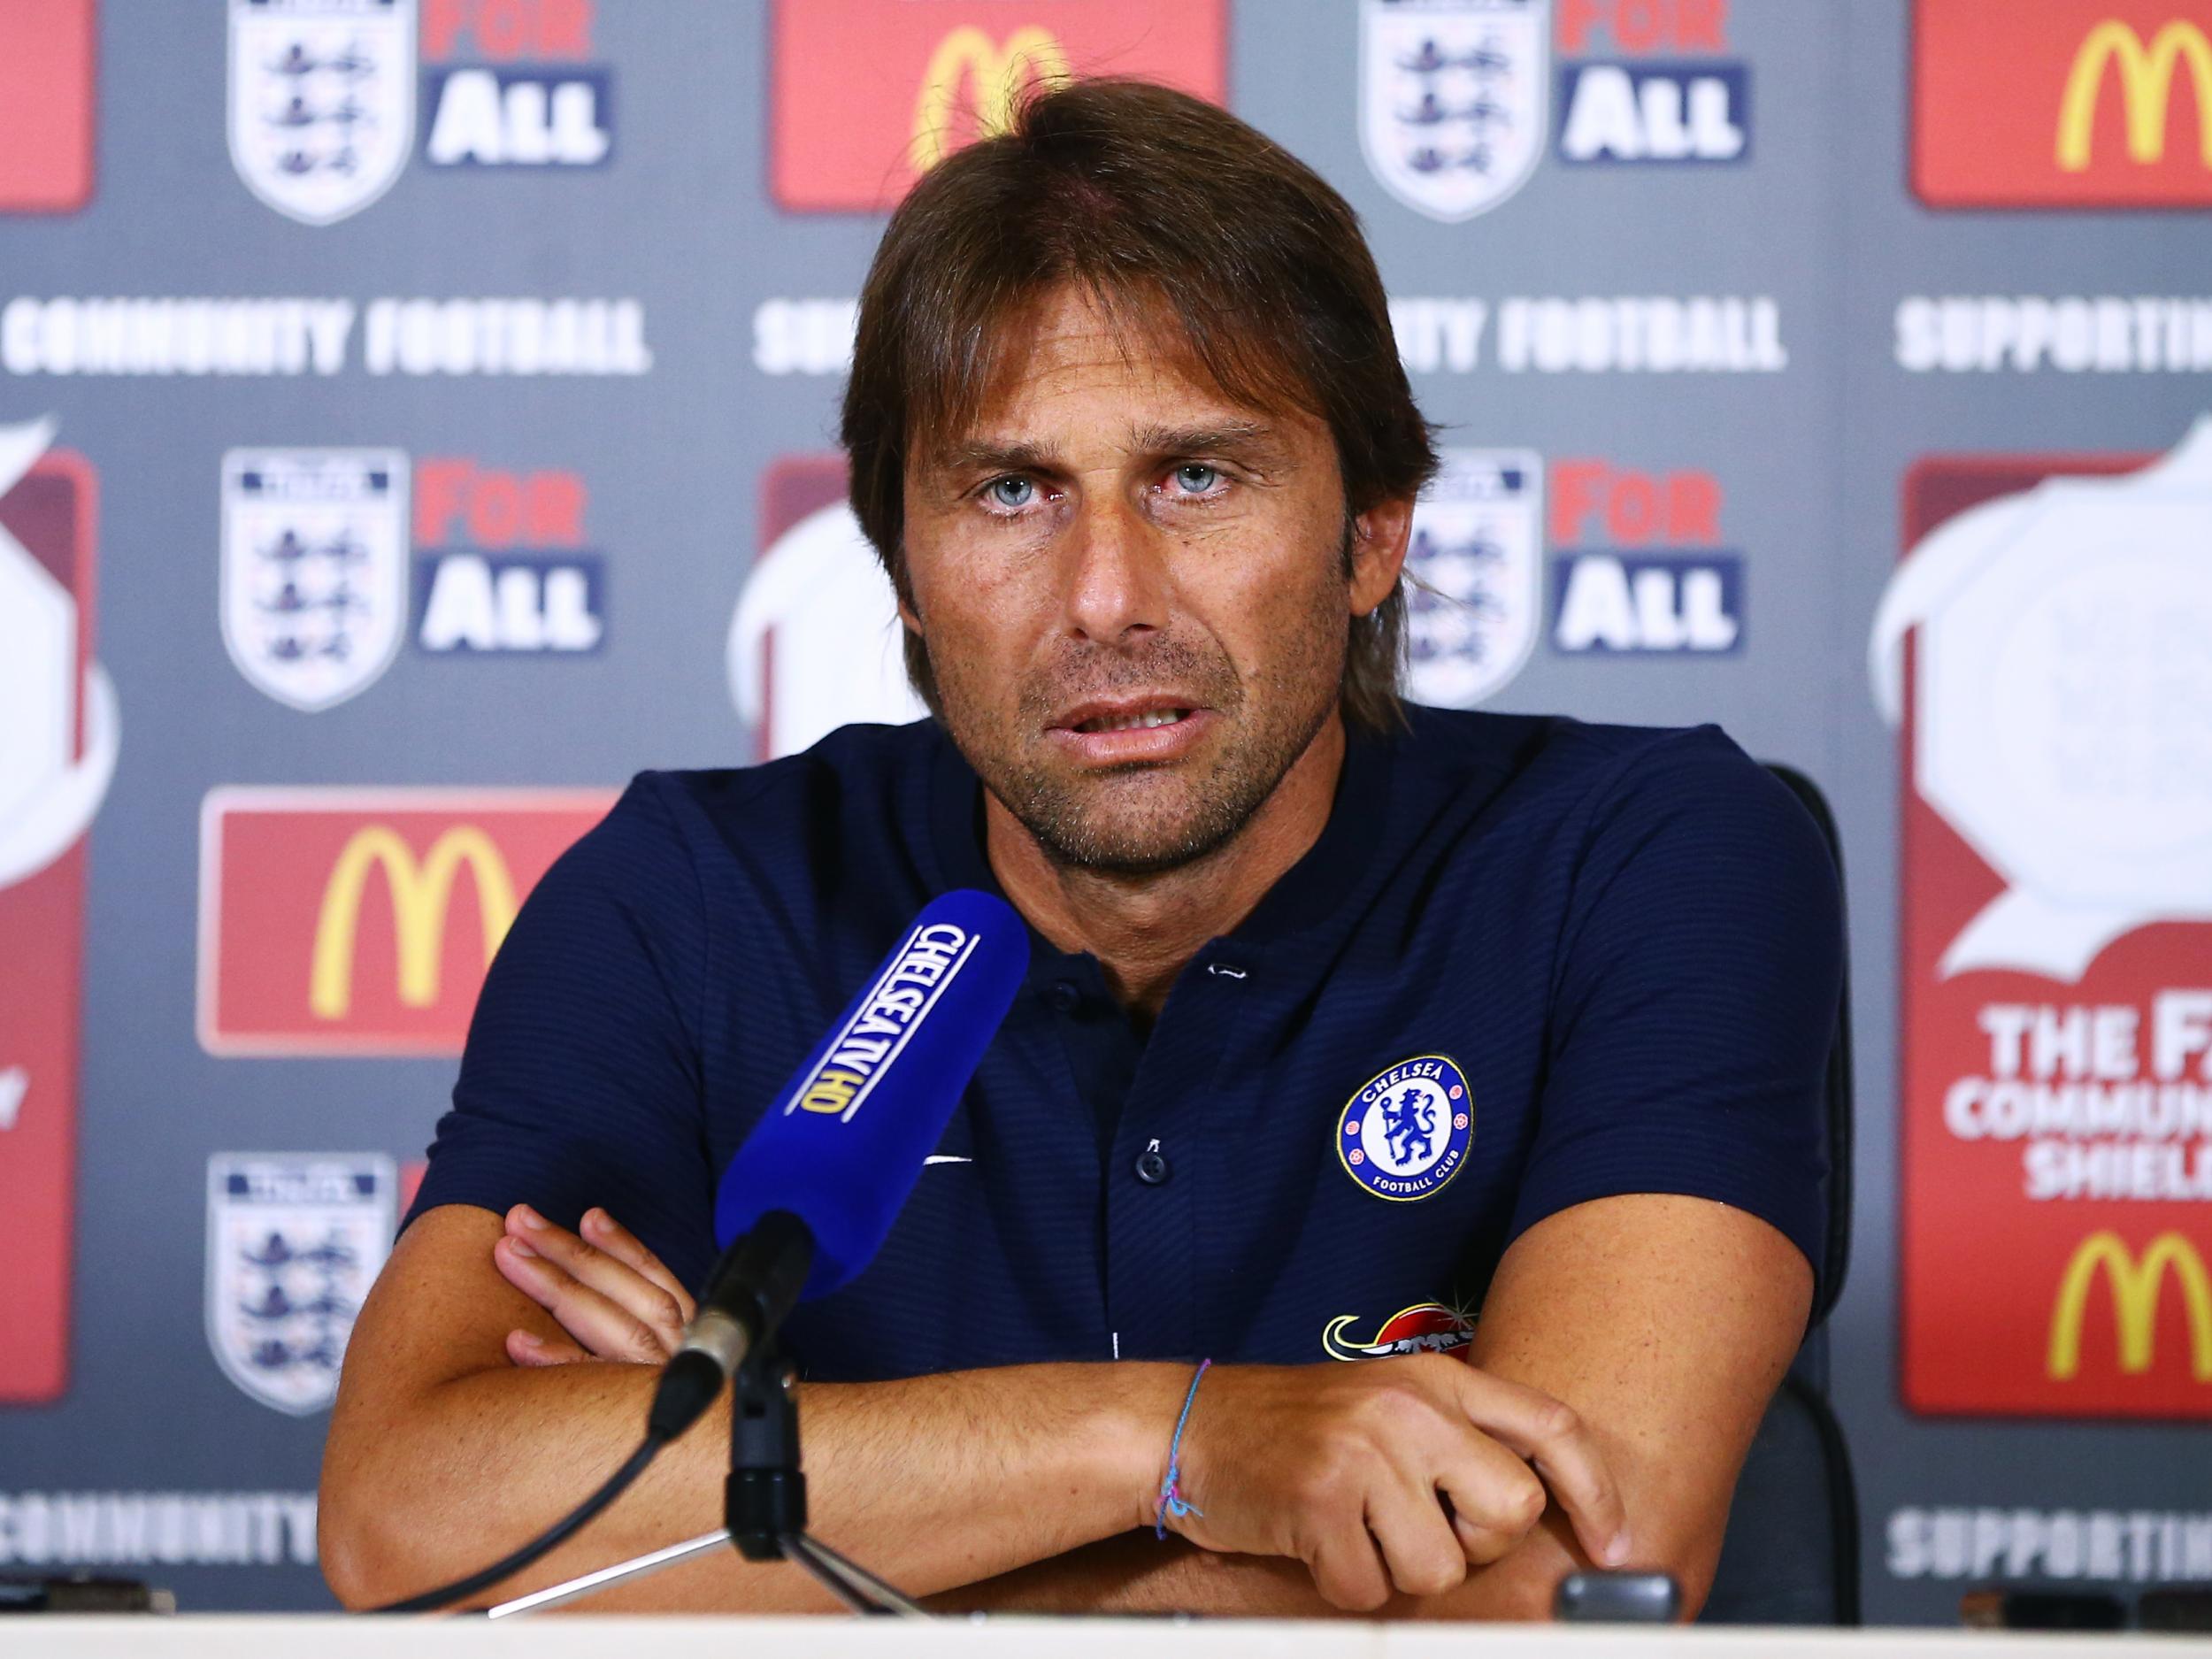 Conte admitted he was 'frustrated' and 'angry' after seeing his side reduced to 10 men